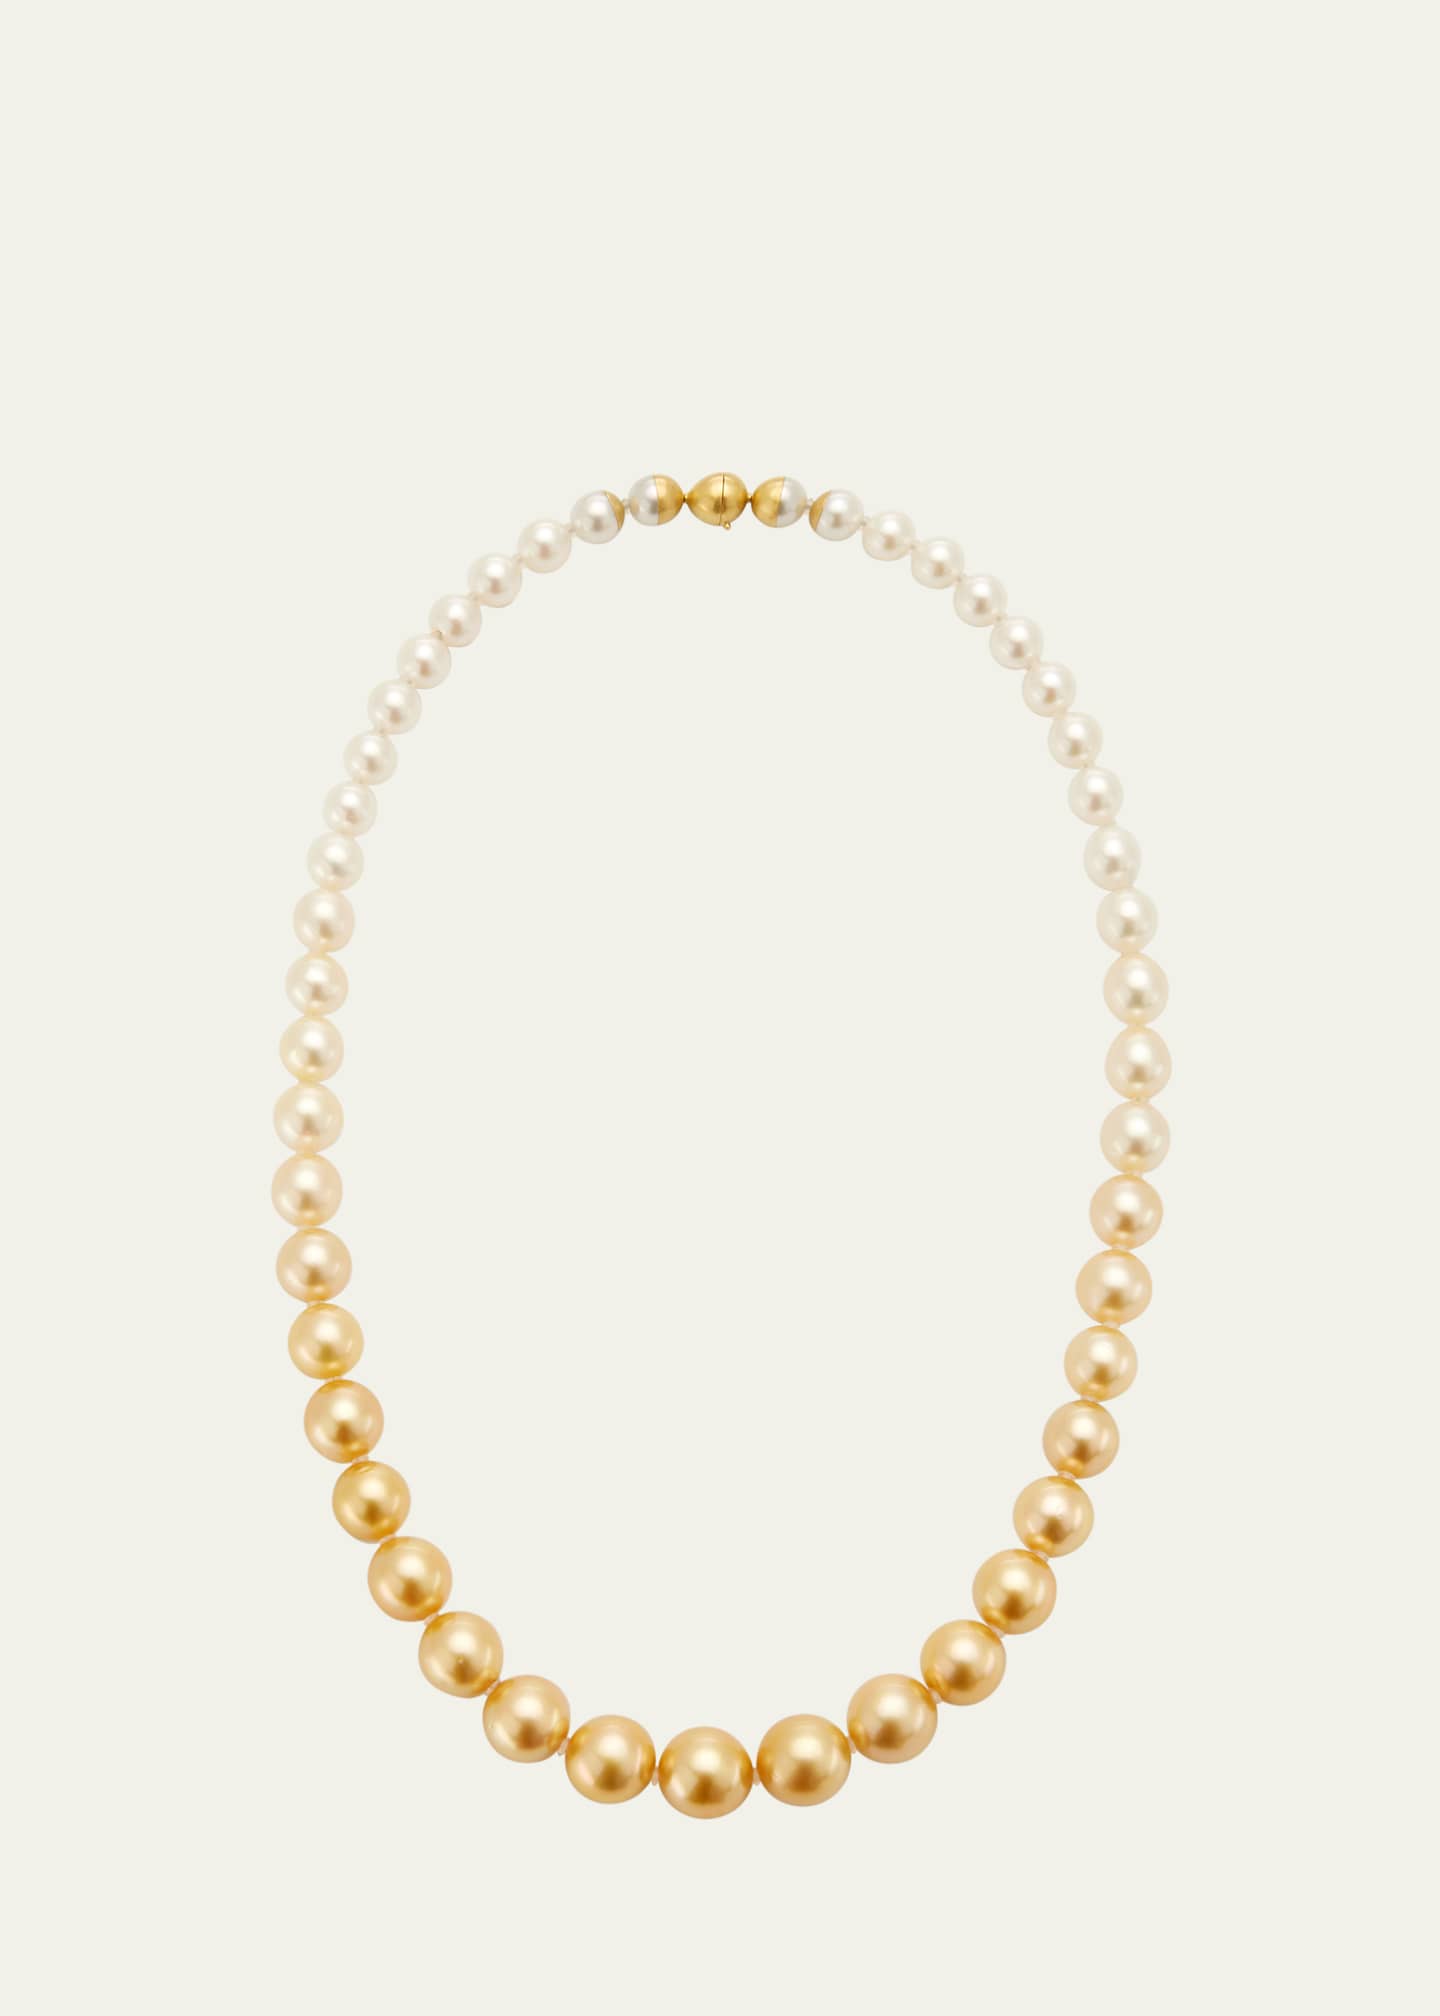 YUTAI Ombre Golden Pearl Sectional Necklace - Bergdorf Goodman